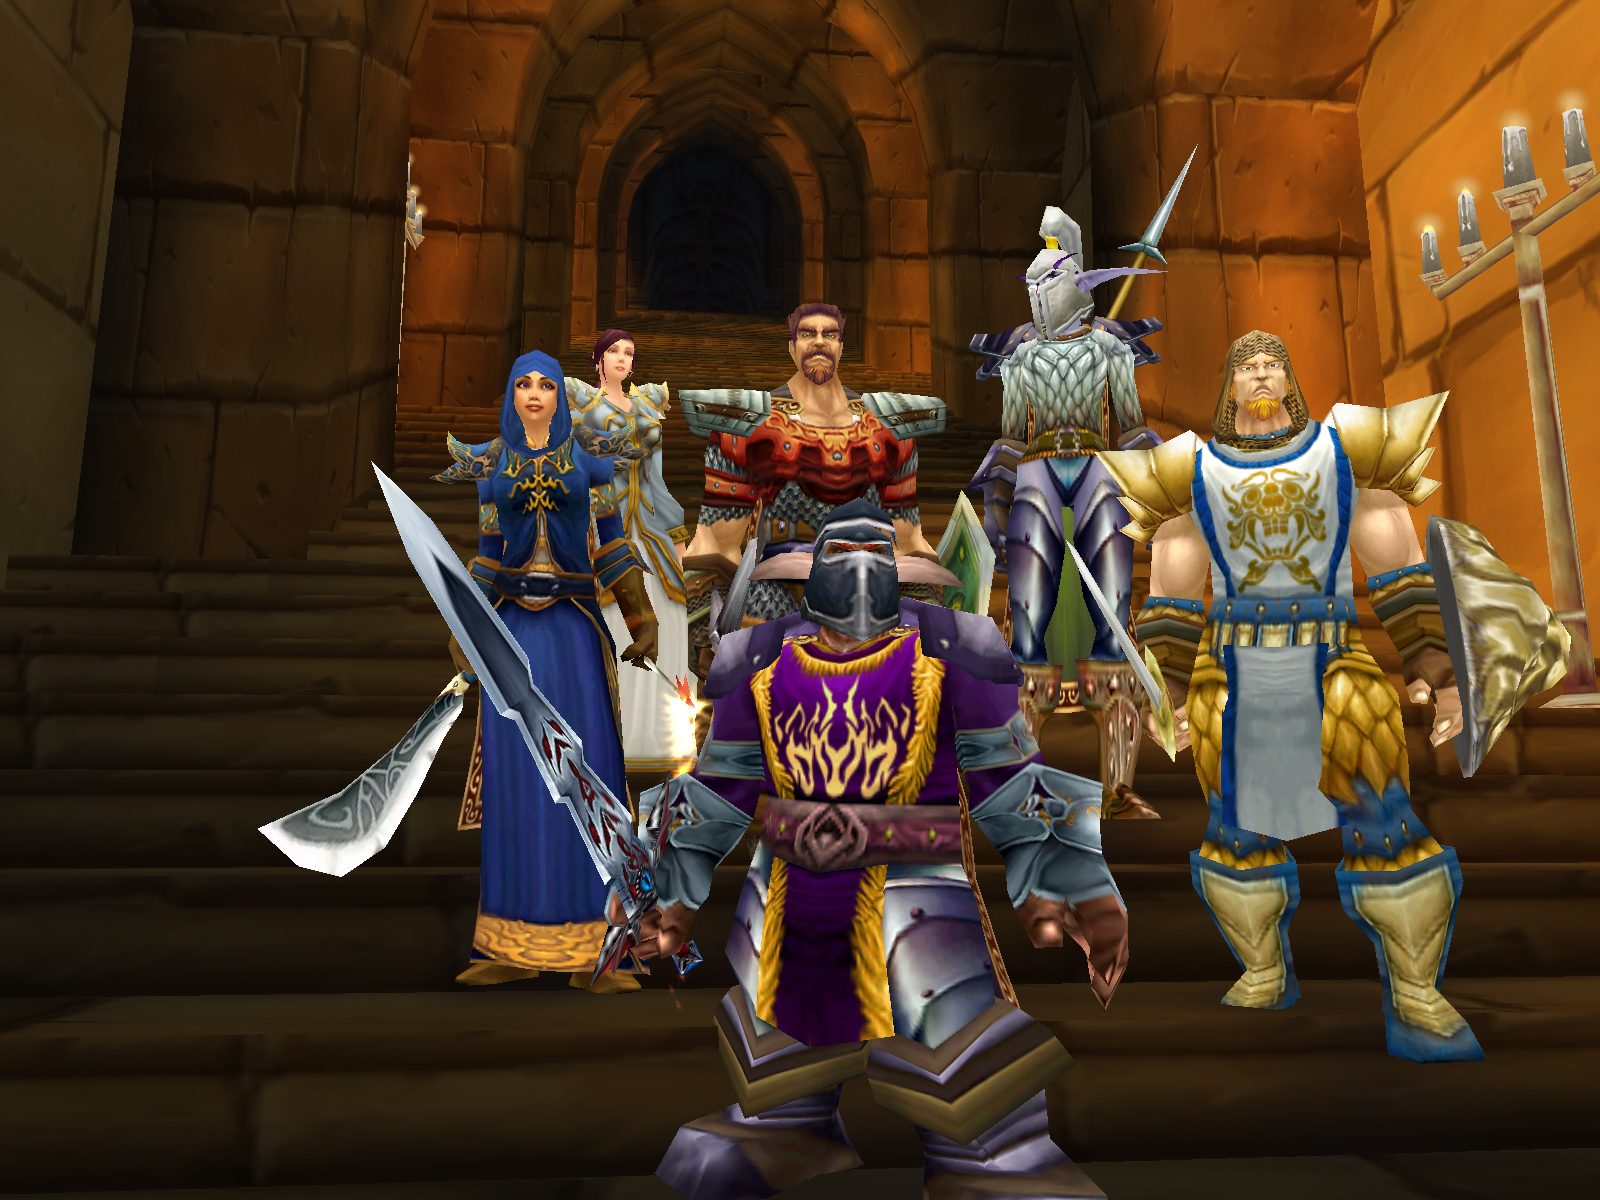 World of Warcraft subscriptions: Blizzard posts second consecutive decline